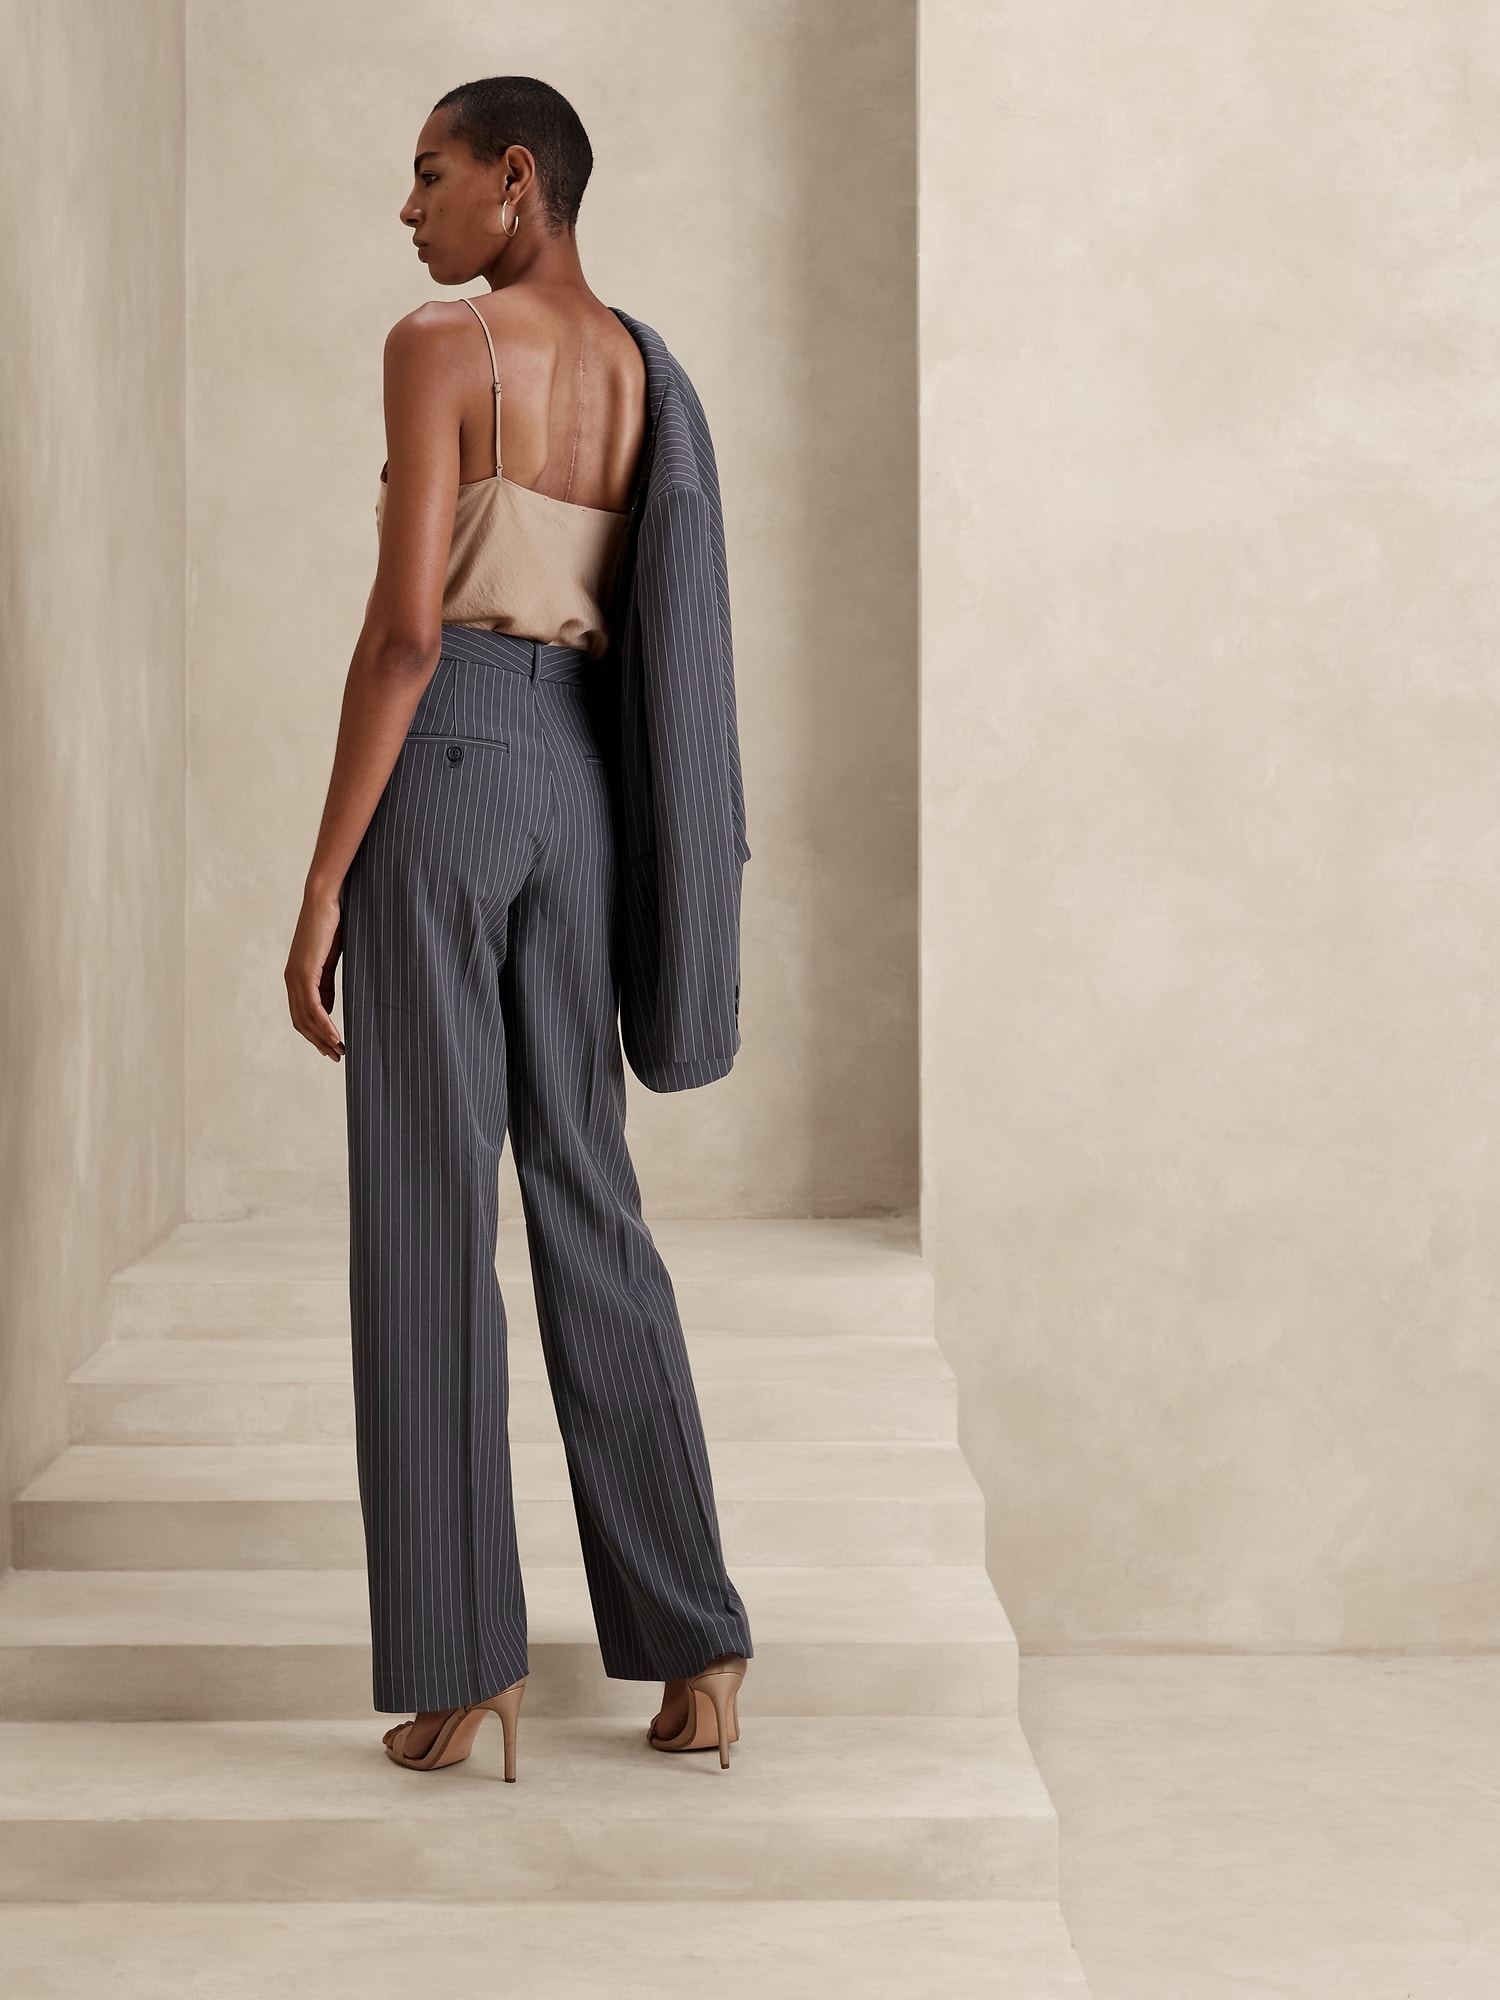 Sculpted Straight Pant